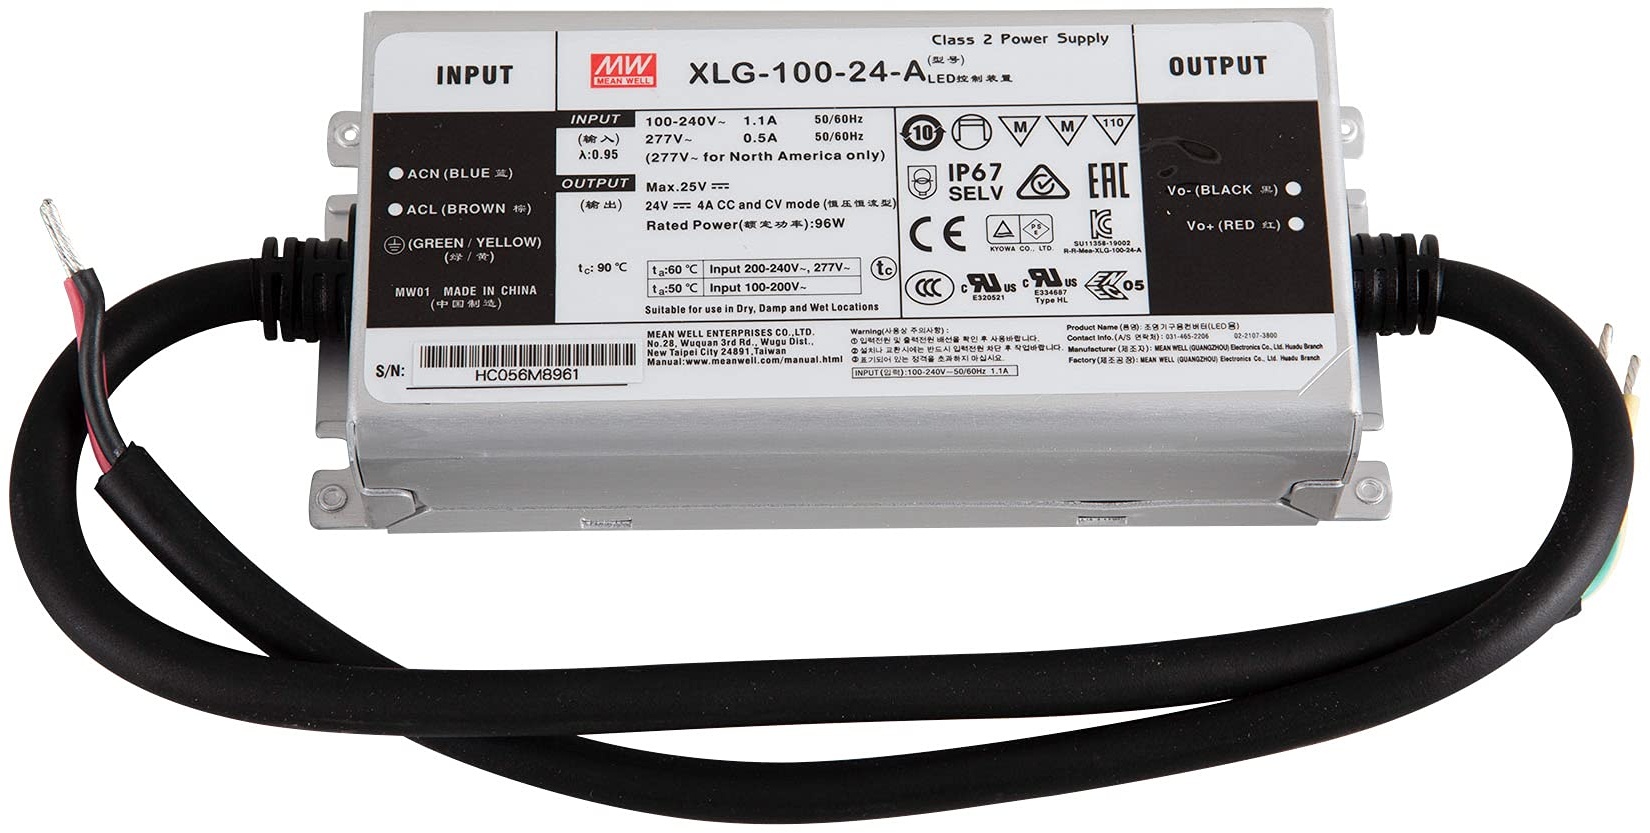 XLG-100-24-A LED Netzteil Trafo Mean Well XLG-100-24-A LED-Trafo, 96 W, 24 V DC, 4000 mA LED Transformator für LED Beleuchtung